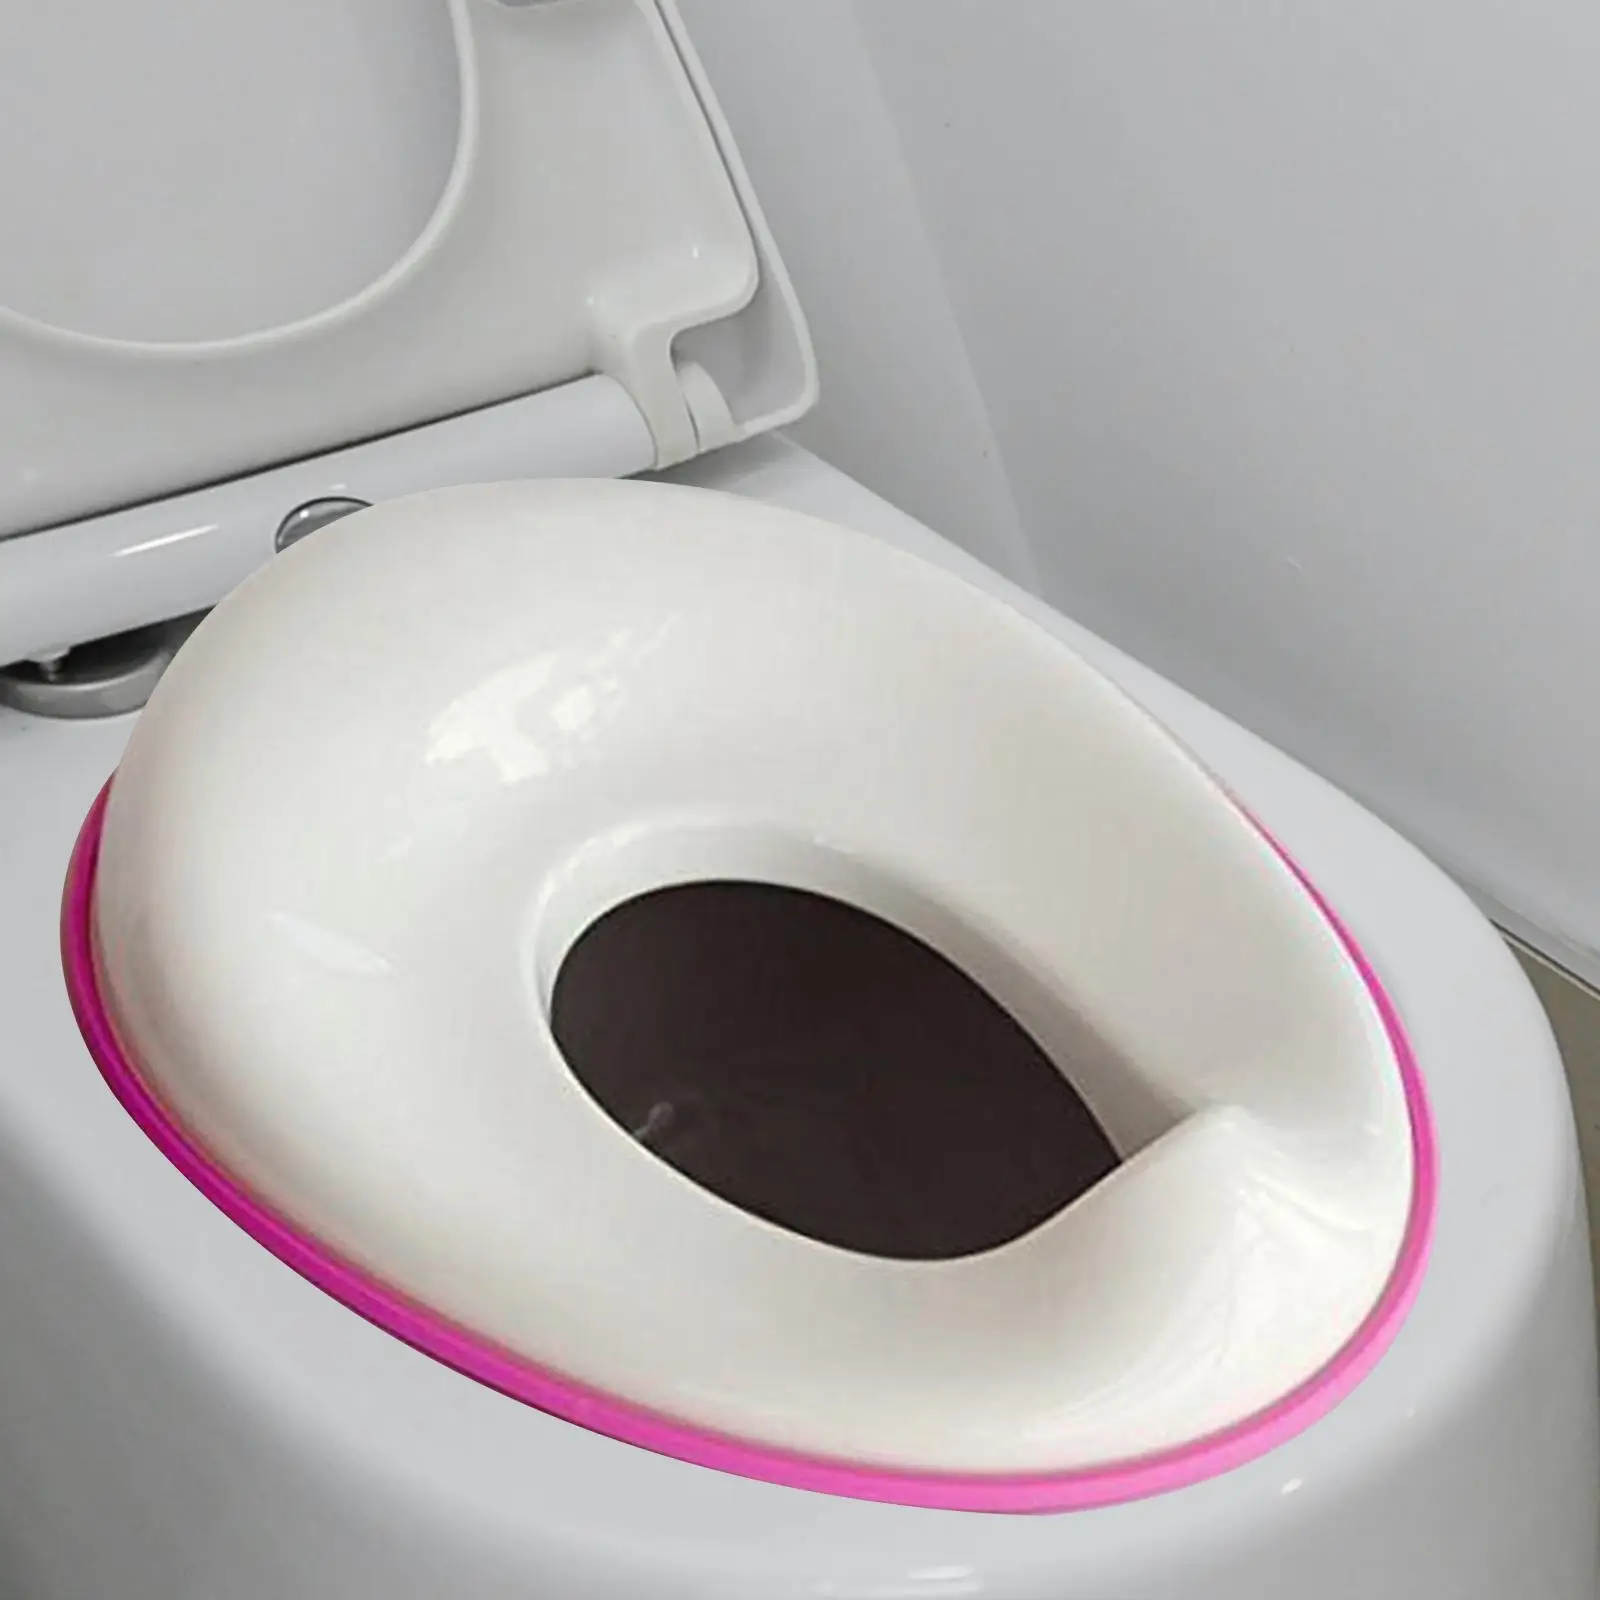 Toddler Toilet Seat Fits Most Toilets Space Saving with splash Has Storage Hook Non Slip Toilet Trainer